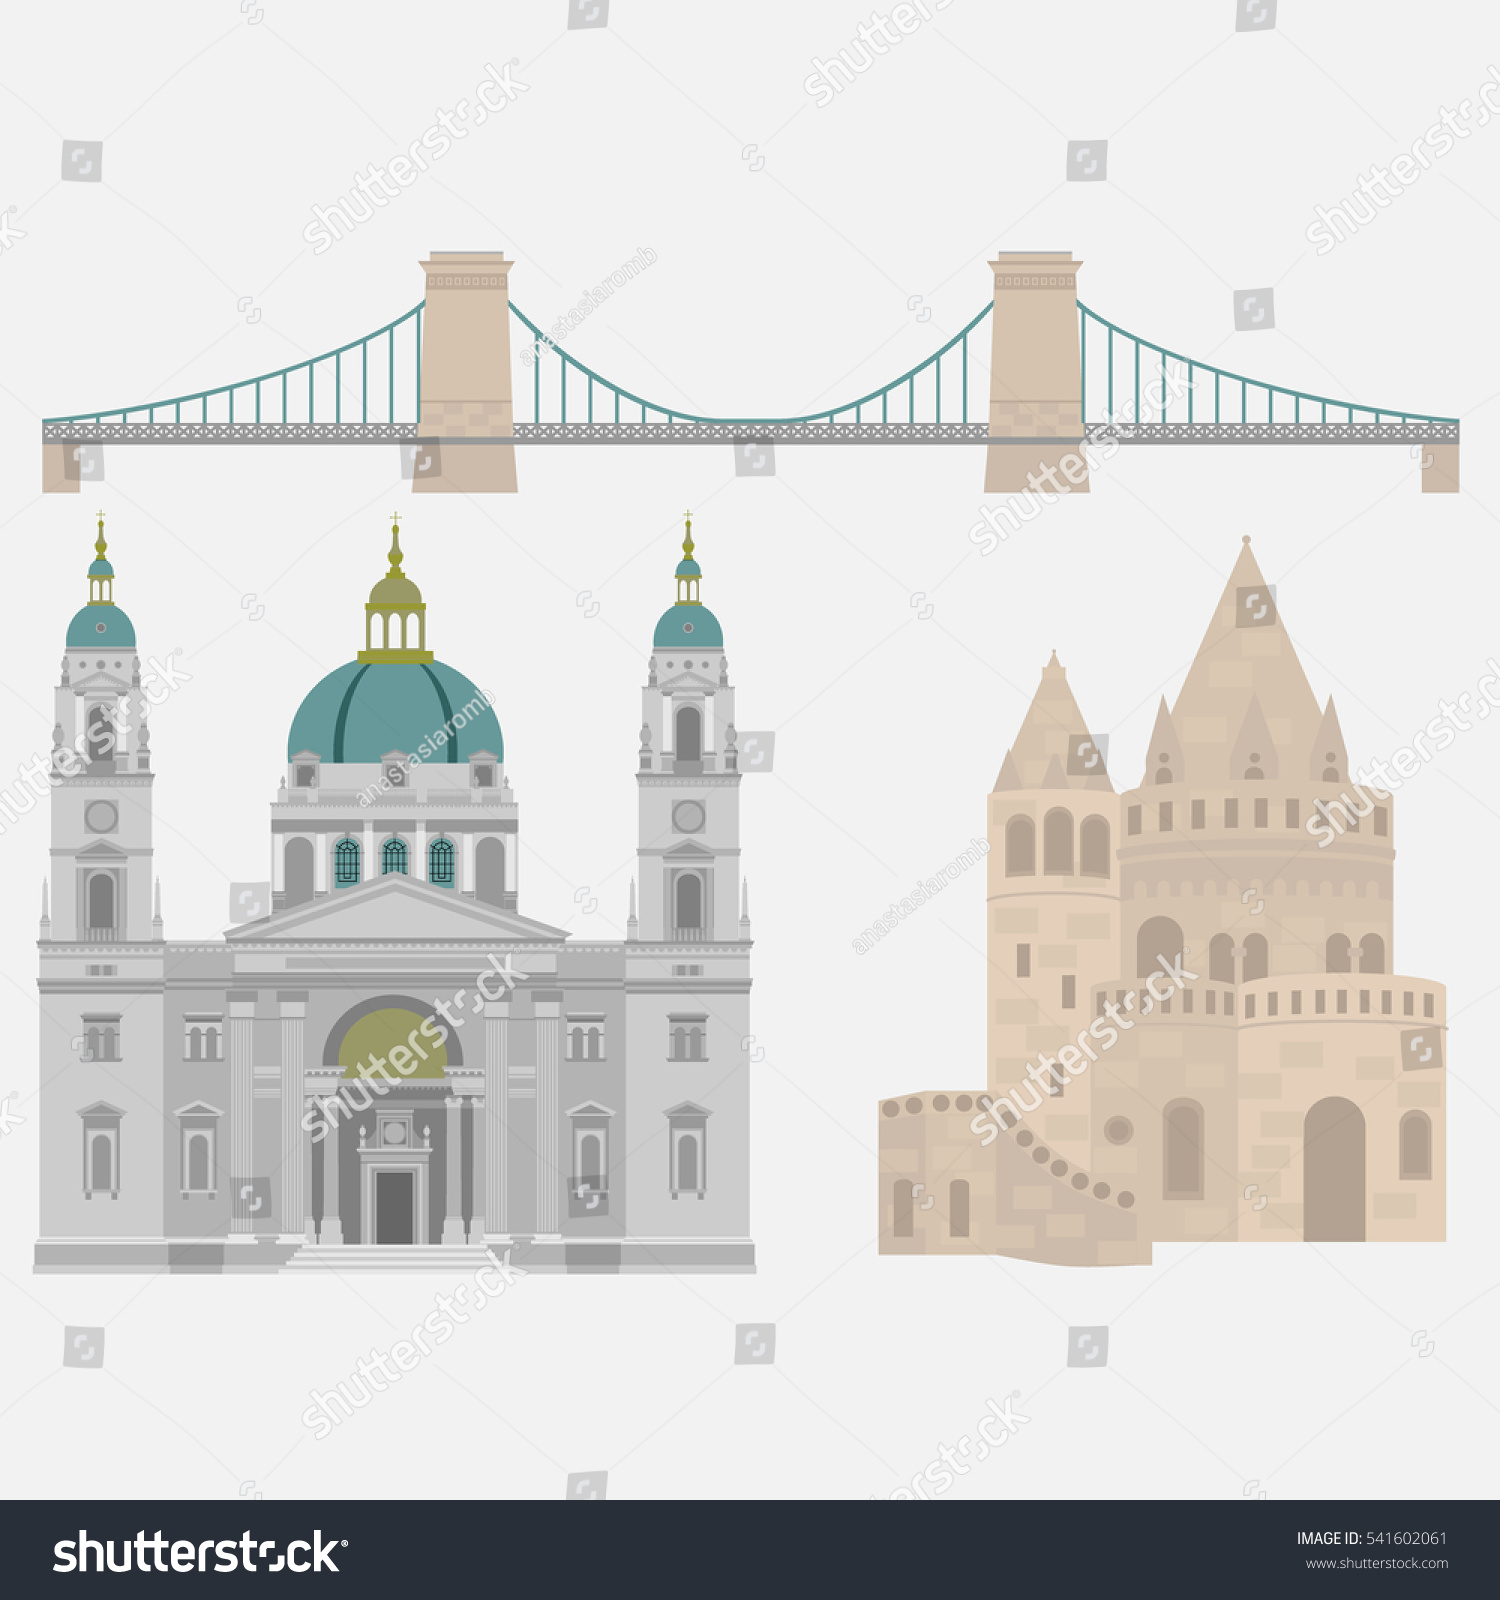 SVG of Hungarian City sights in Budapest. Hungary Landmark Global Travel And Journey Architecture Elements Chain Bridge, Fisherman's bastion, St. Istvan basilica svg